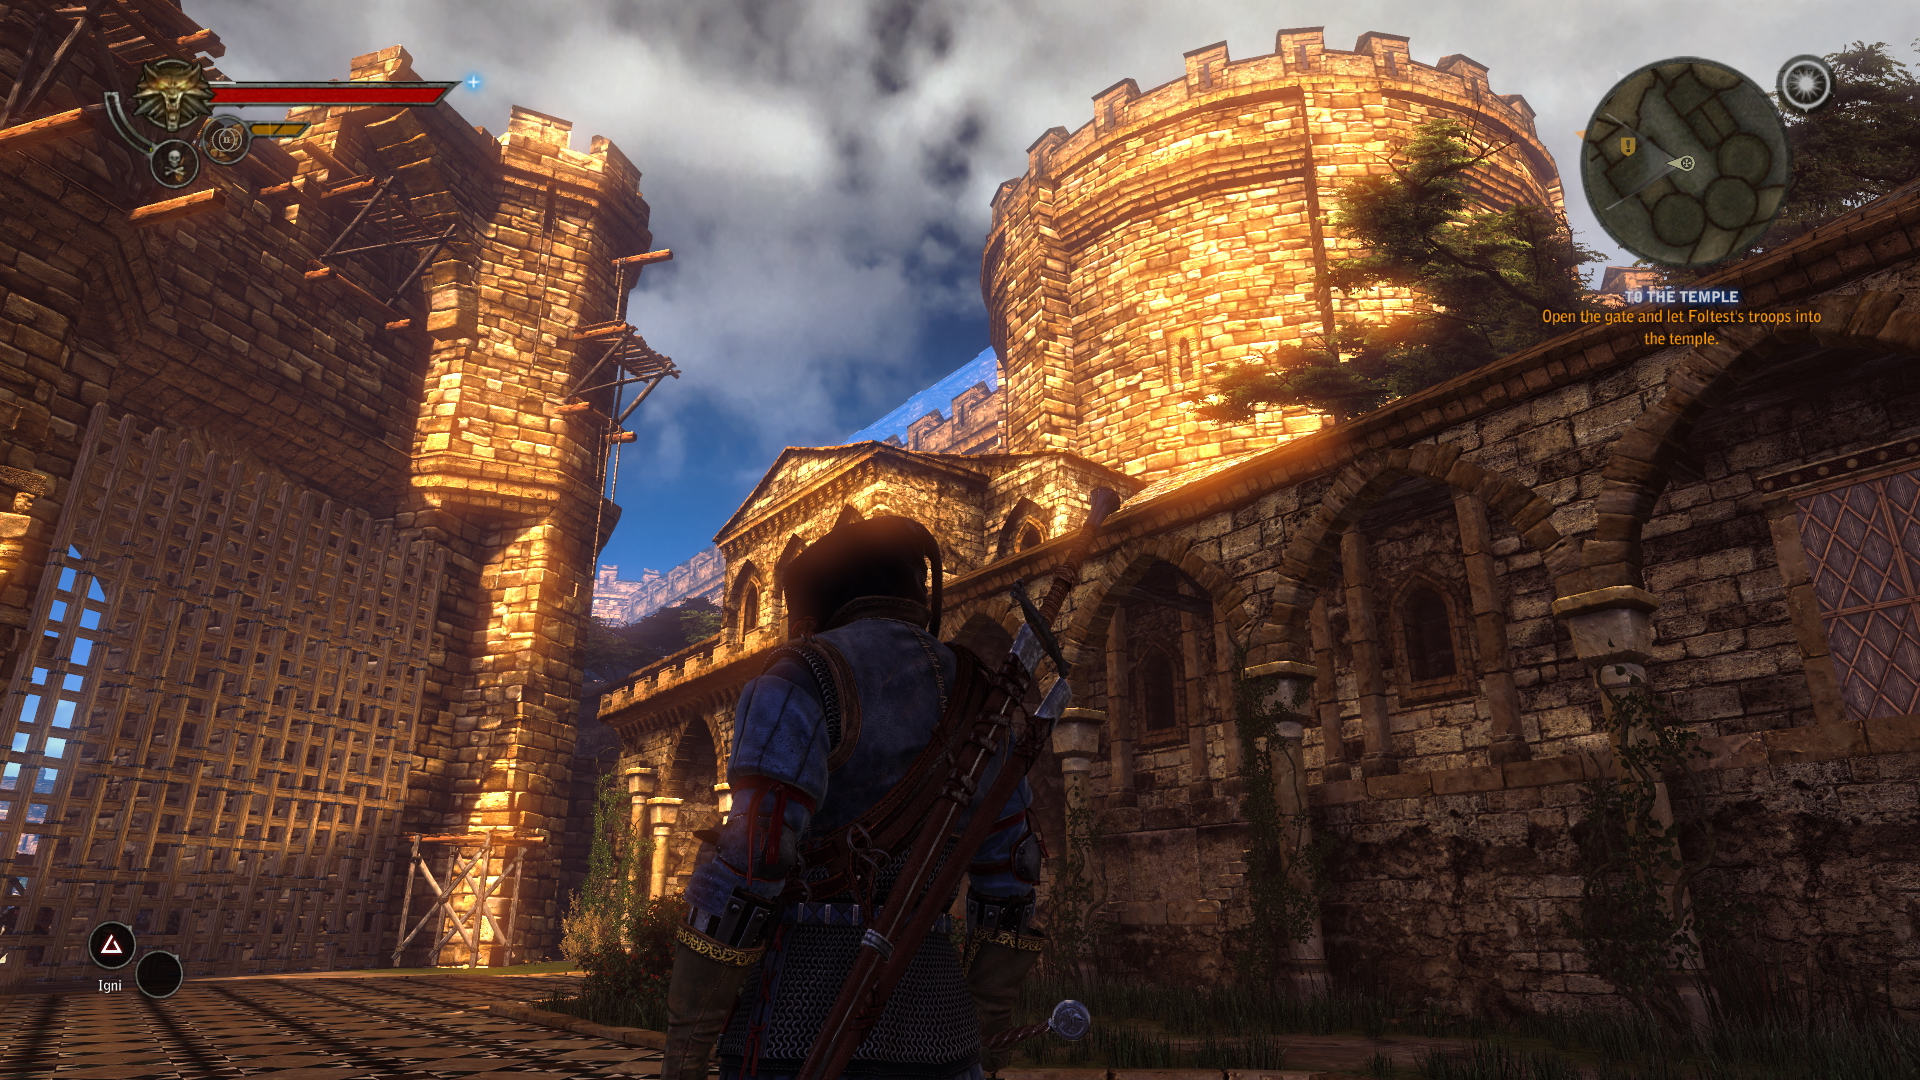 The Witcher 2 Enhancement Project